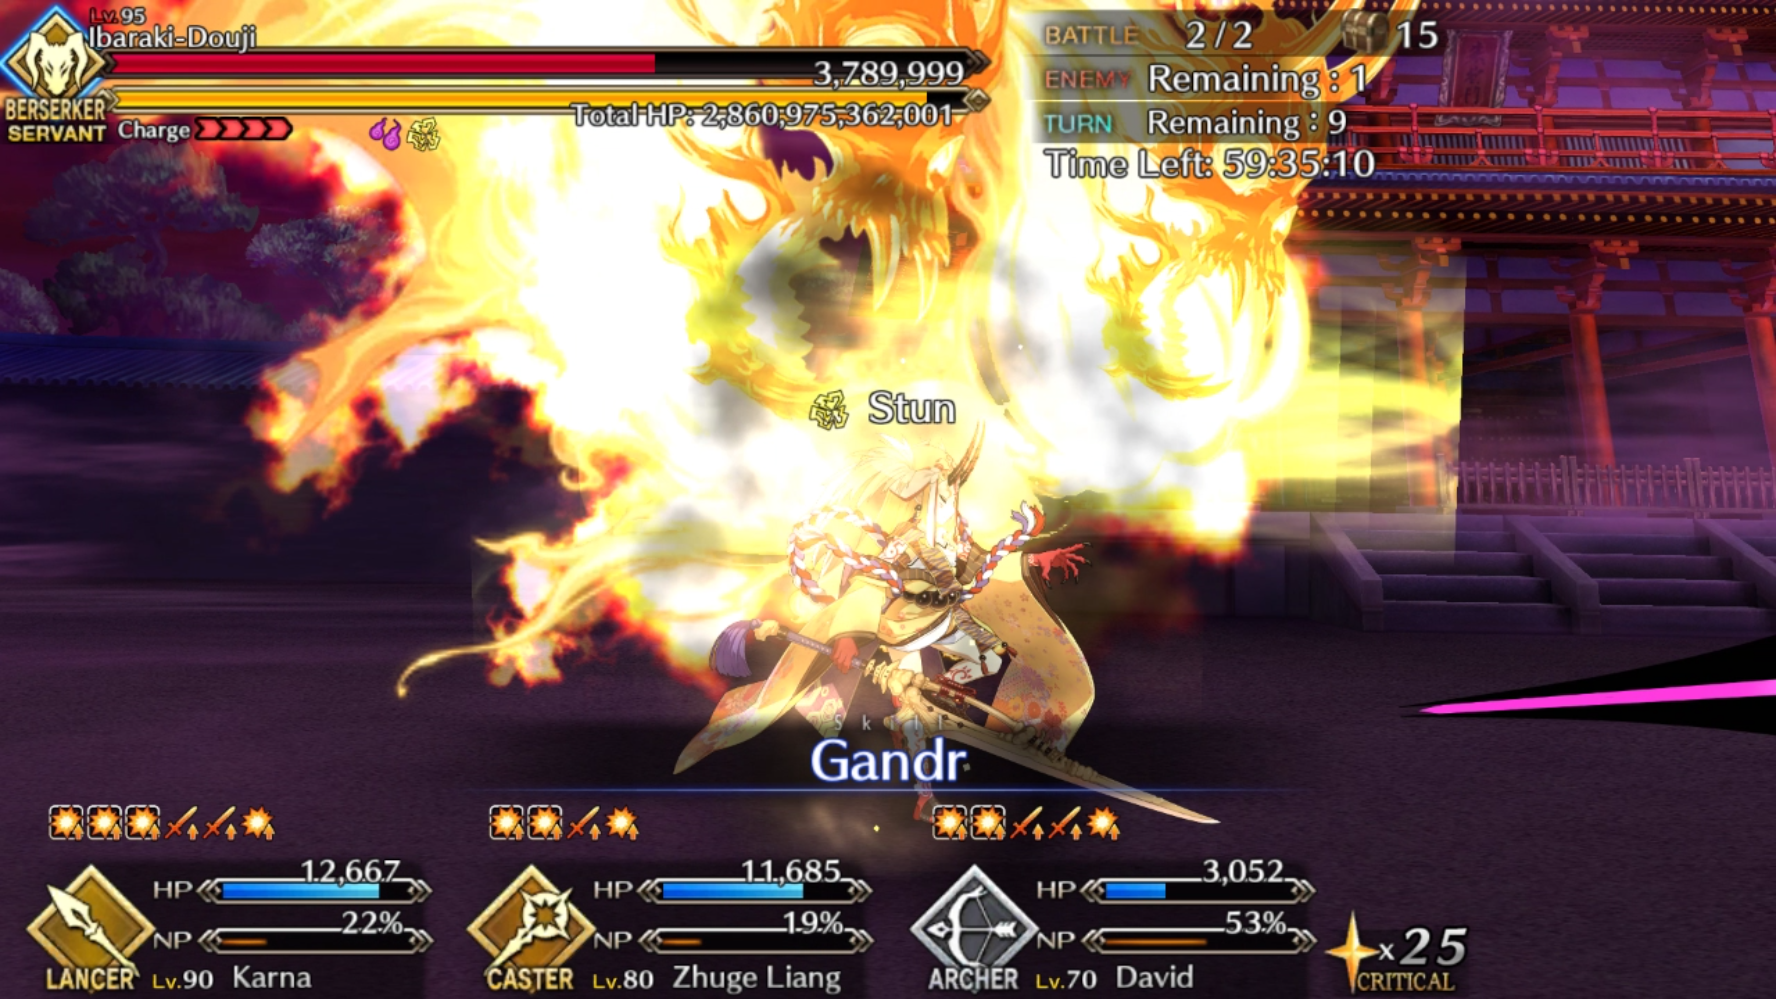 Ibaraki is stunned right as she wants to launch her Noble Phantasm.